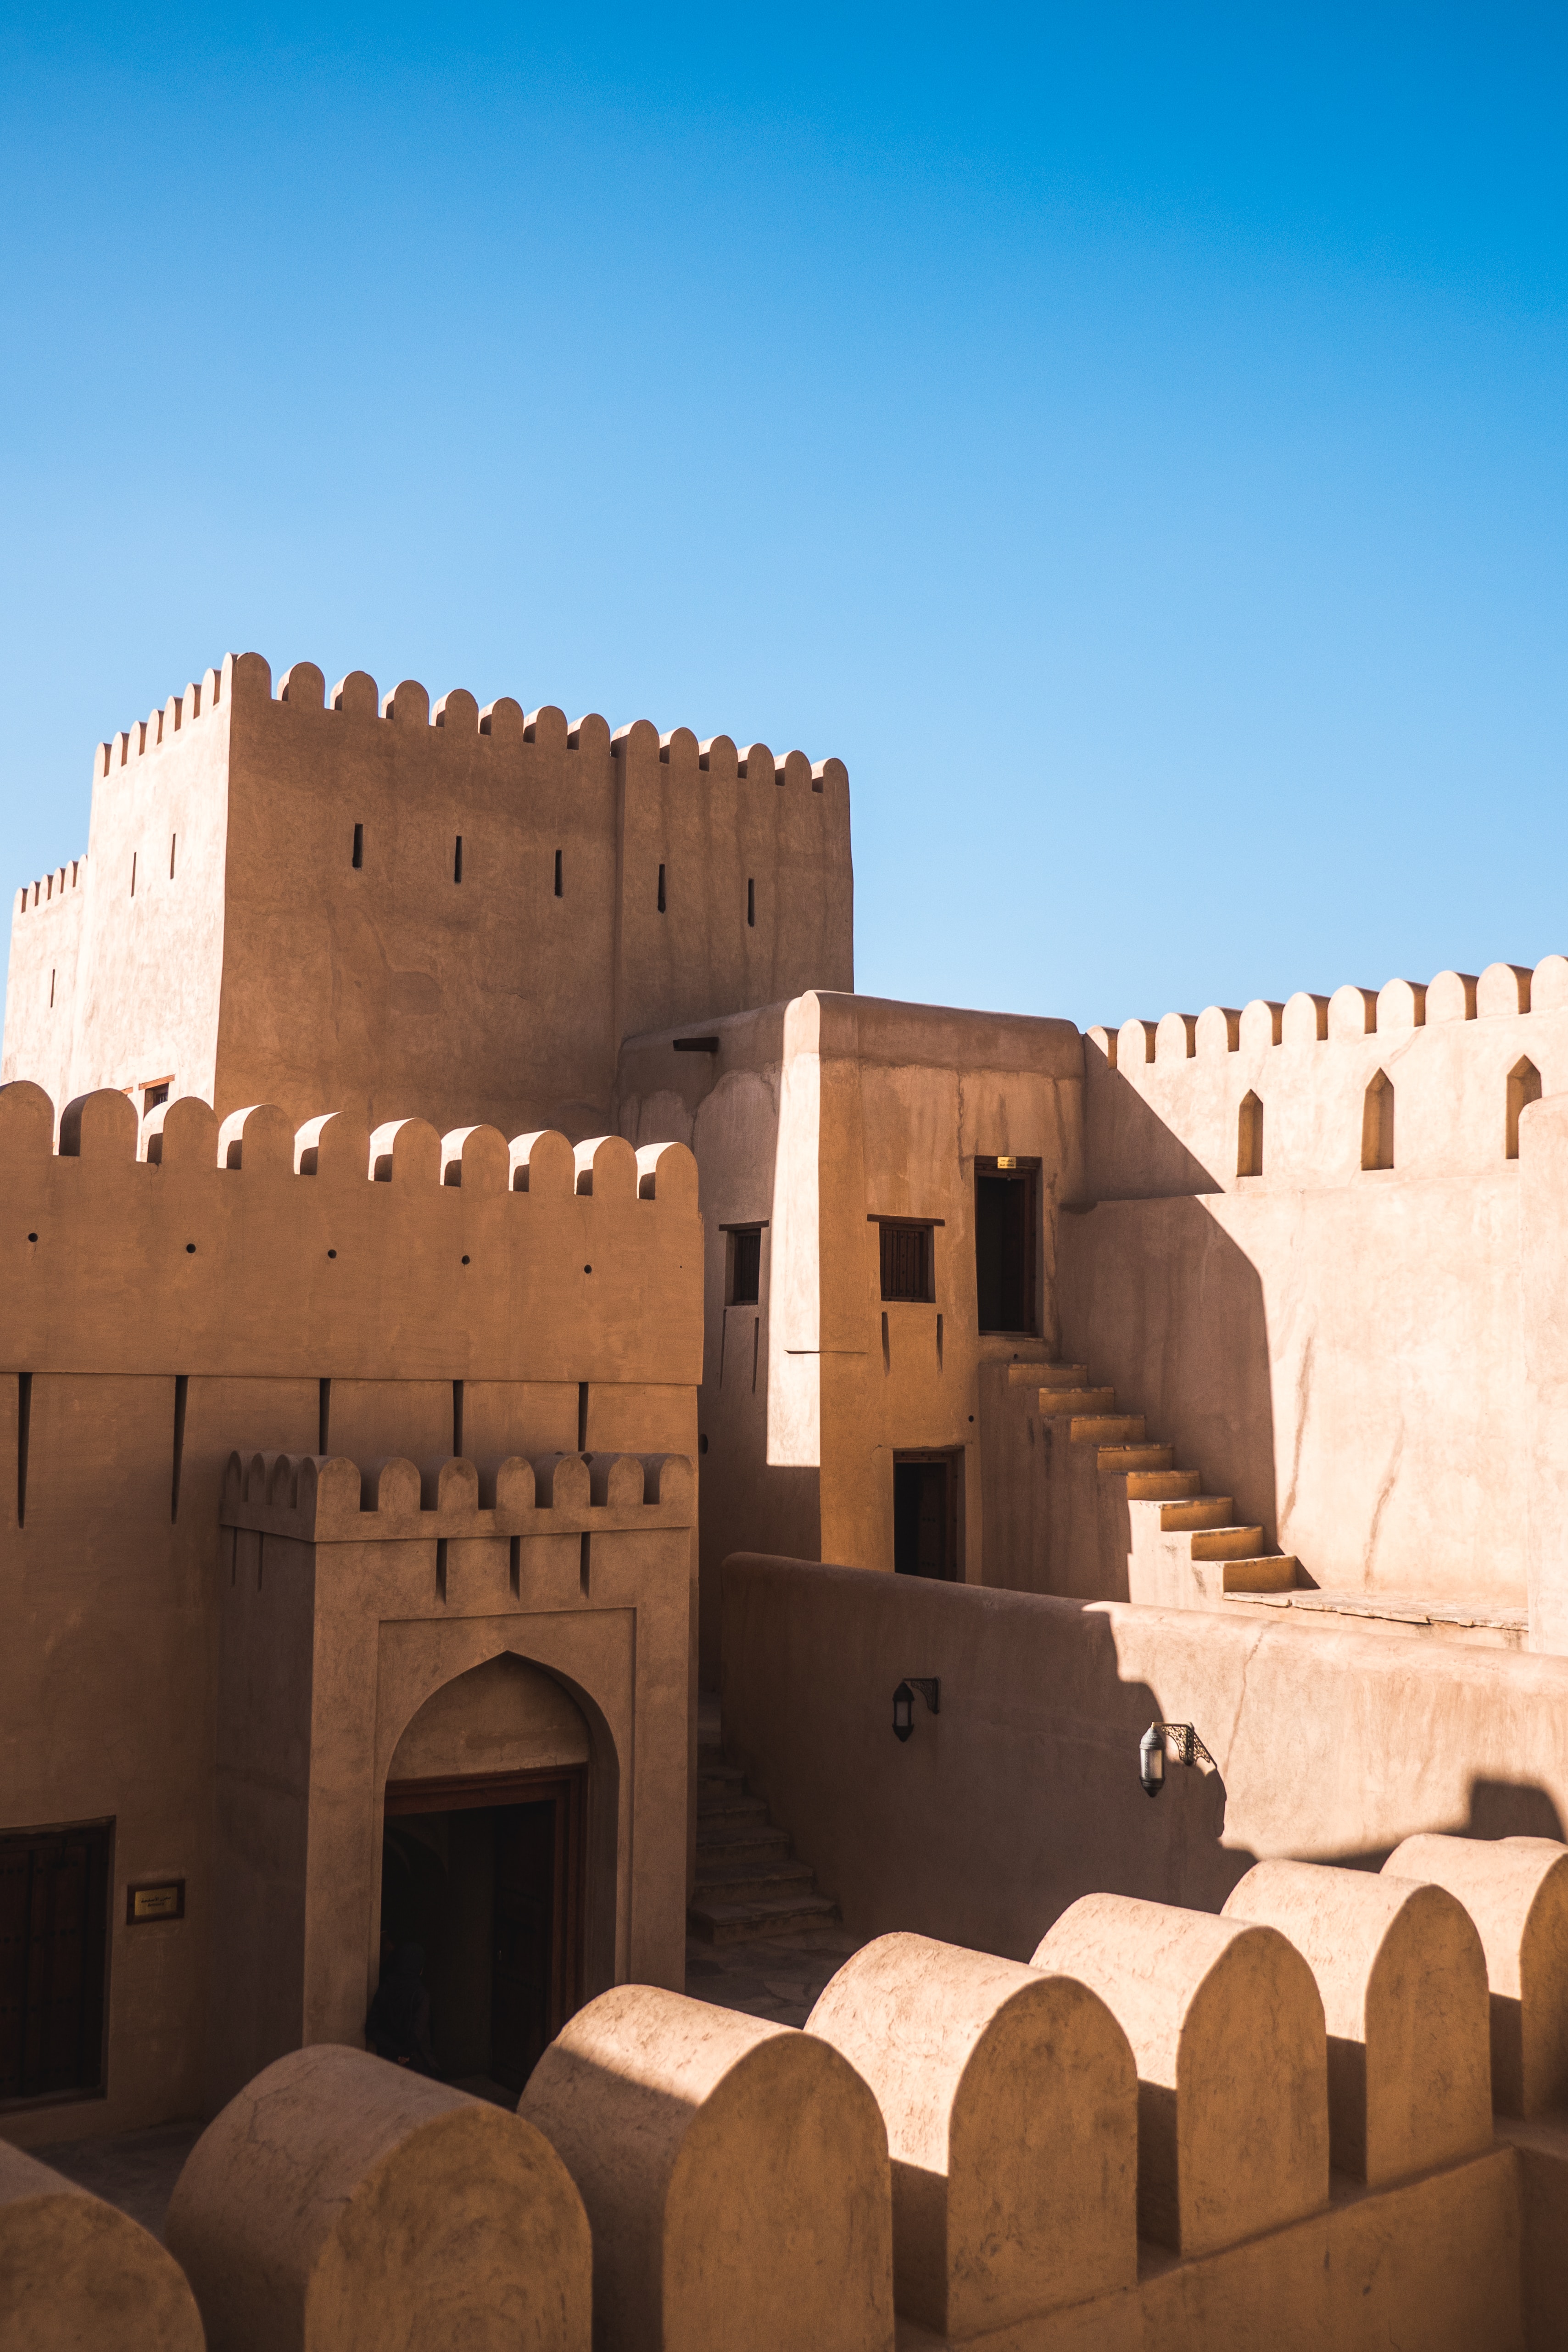 An image of an arabic fort.